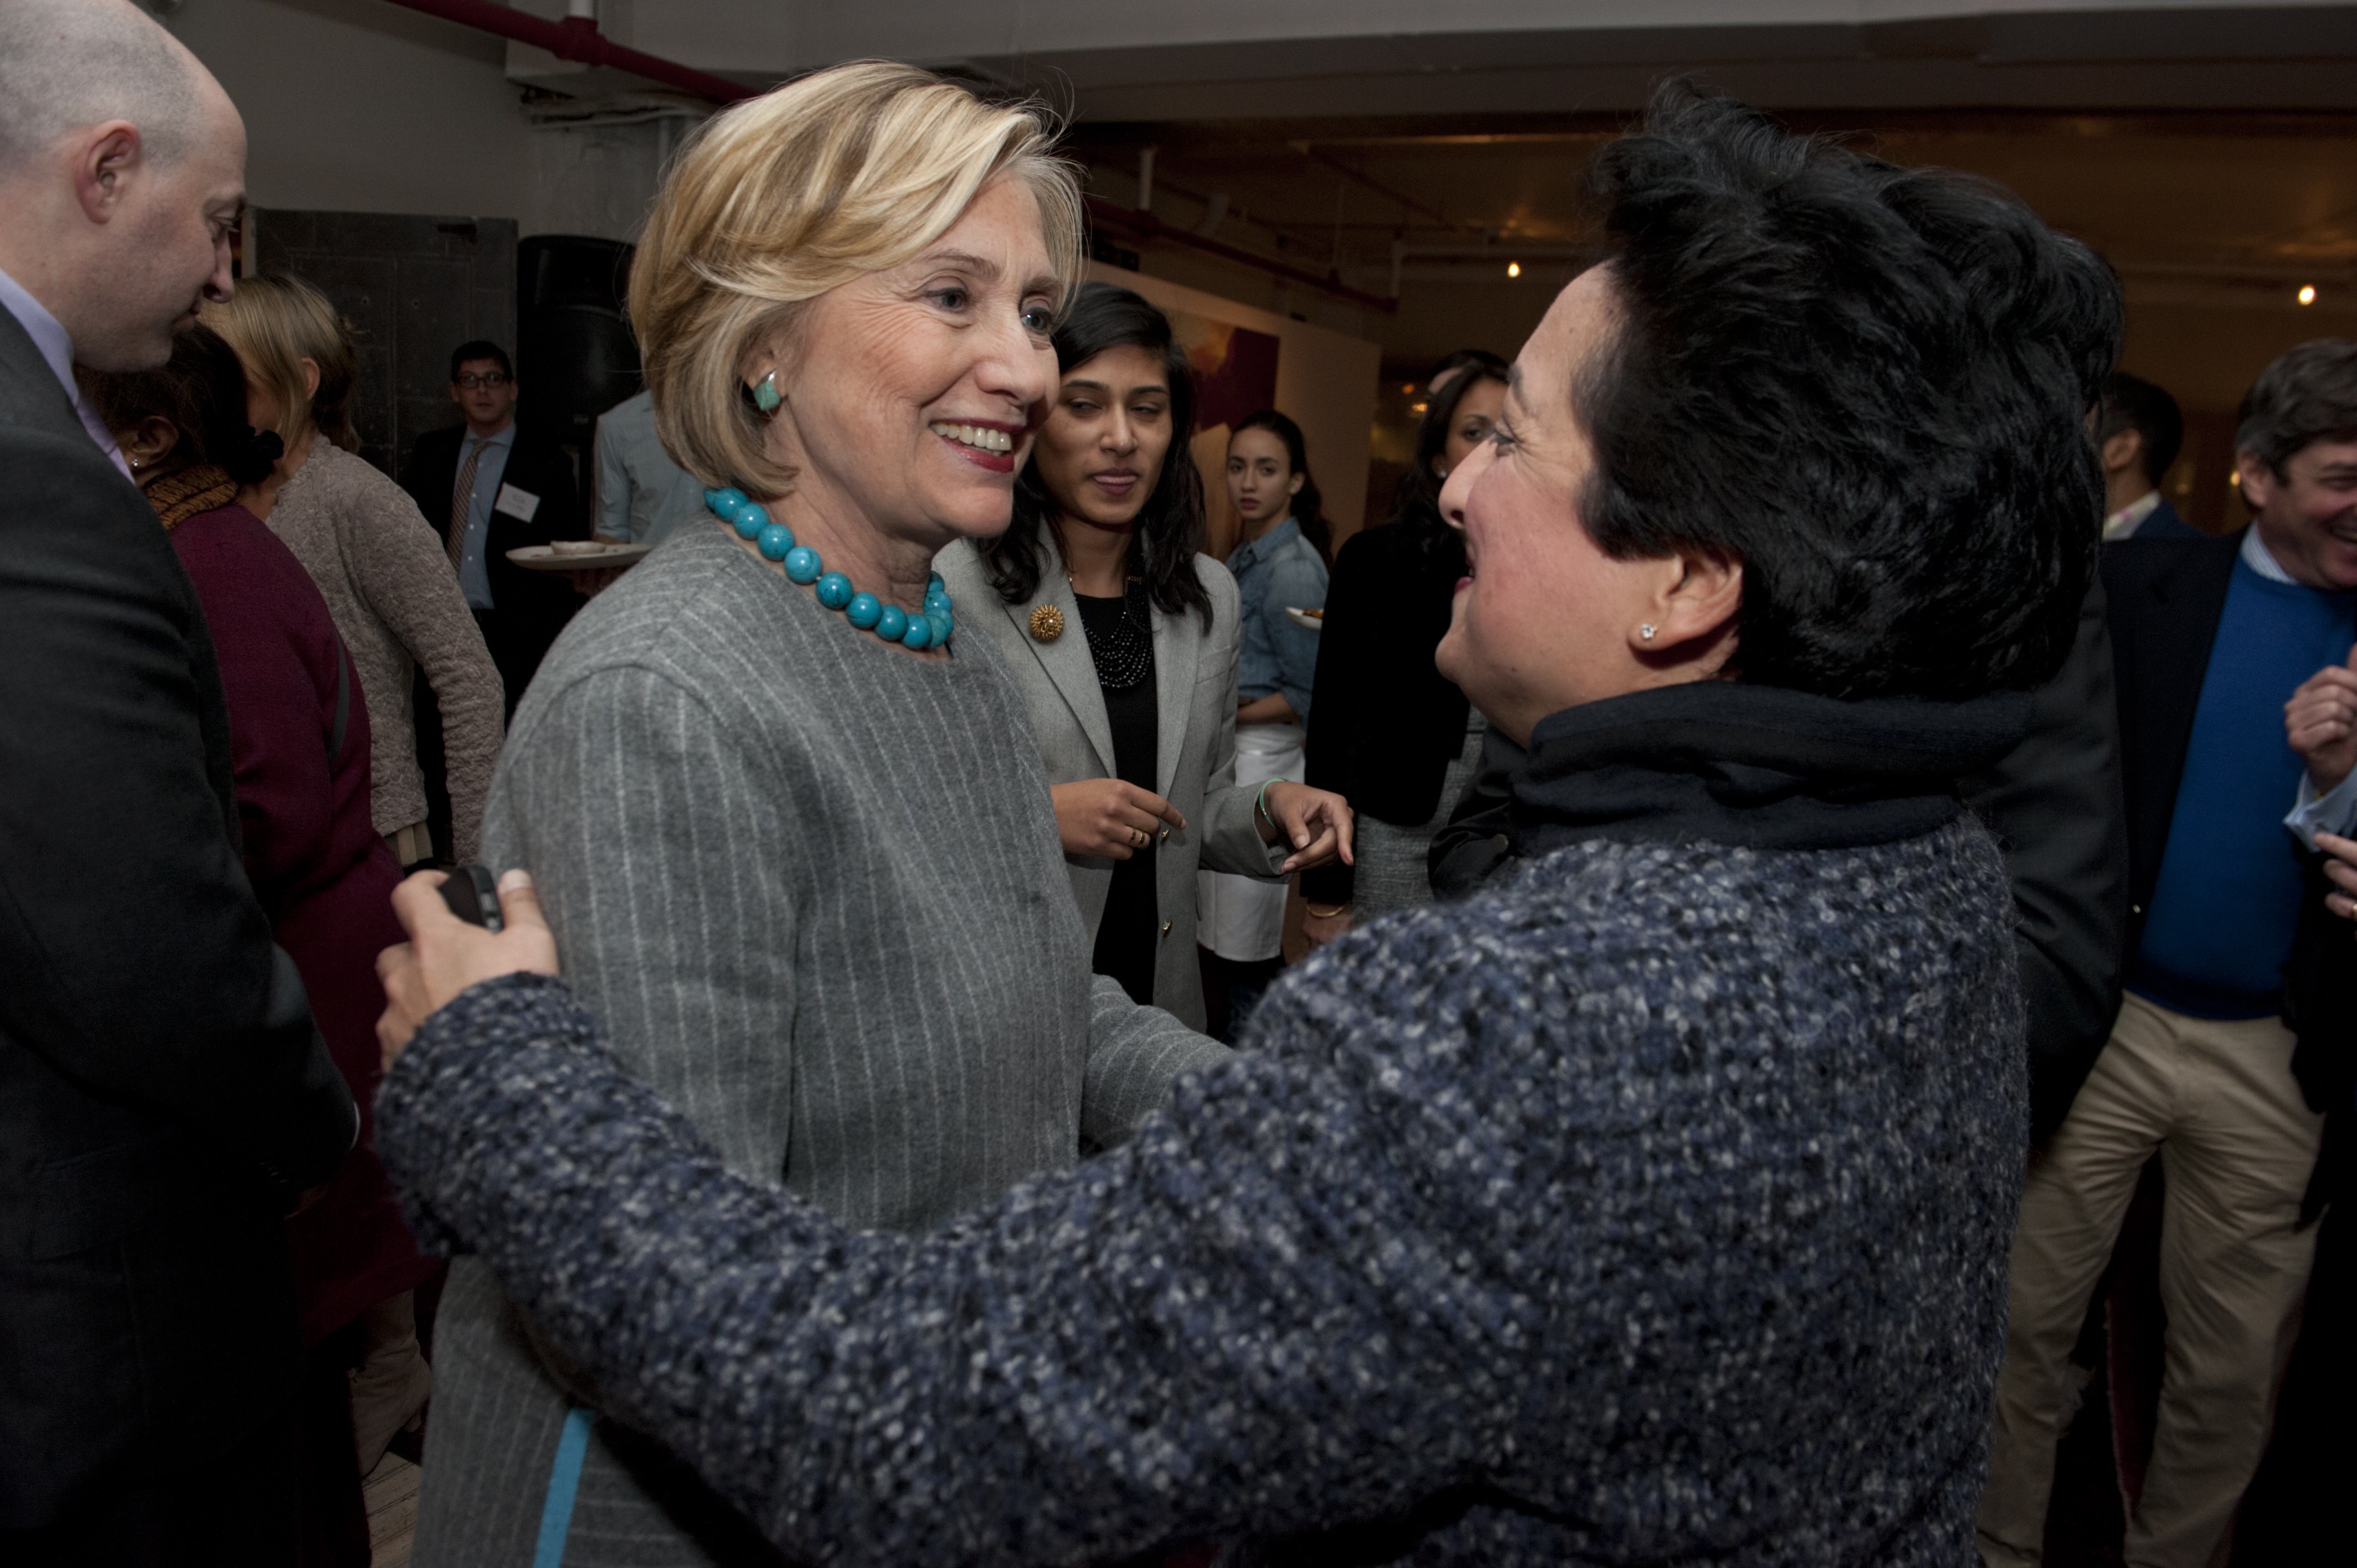 Shamina Singh greets former presidential candidate Hilary Clinton.